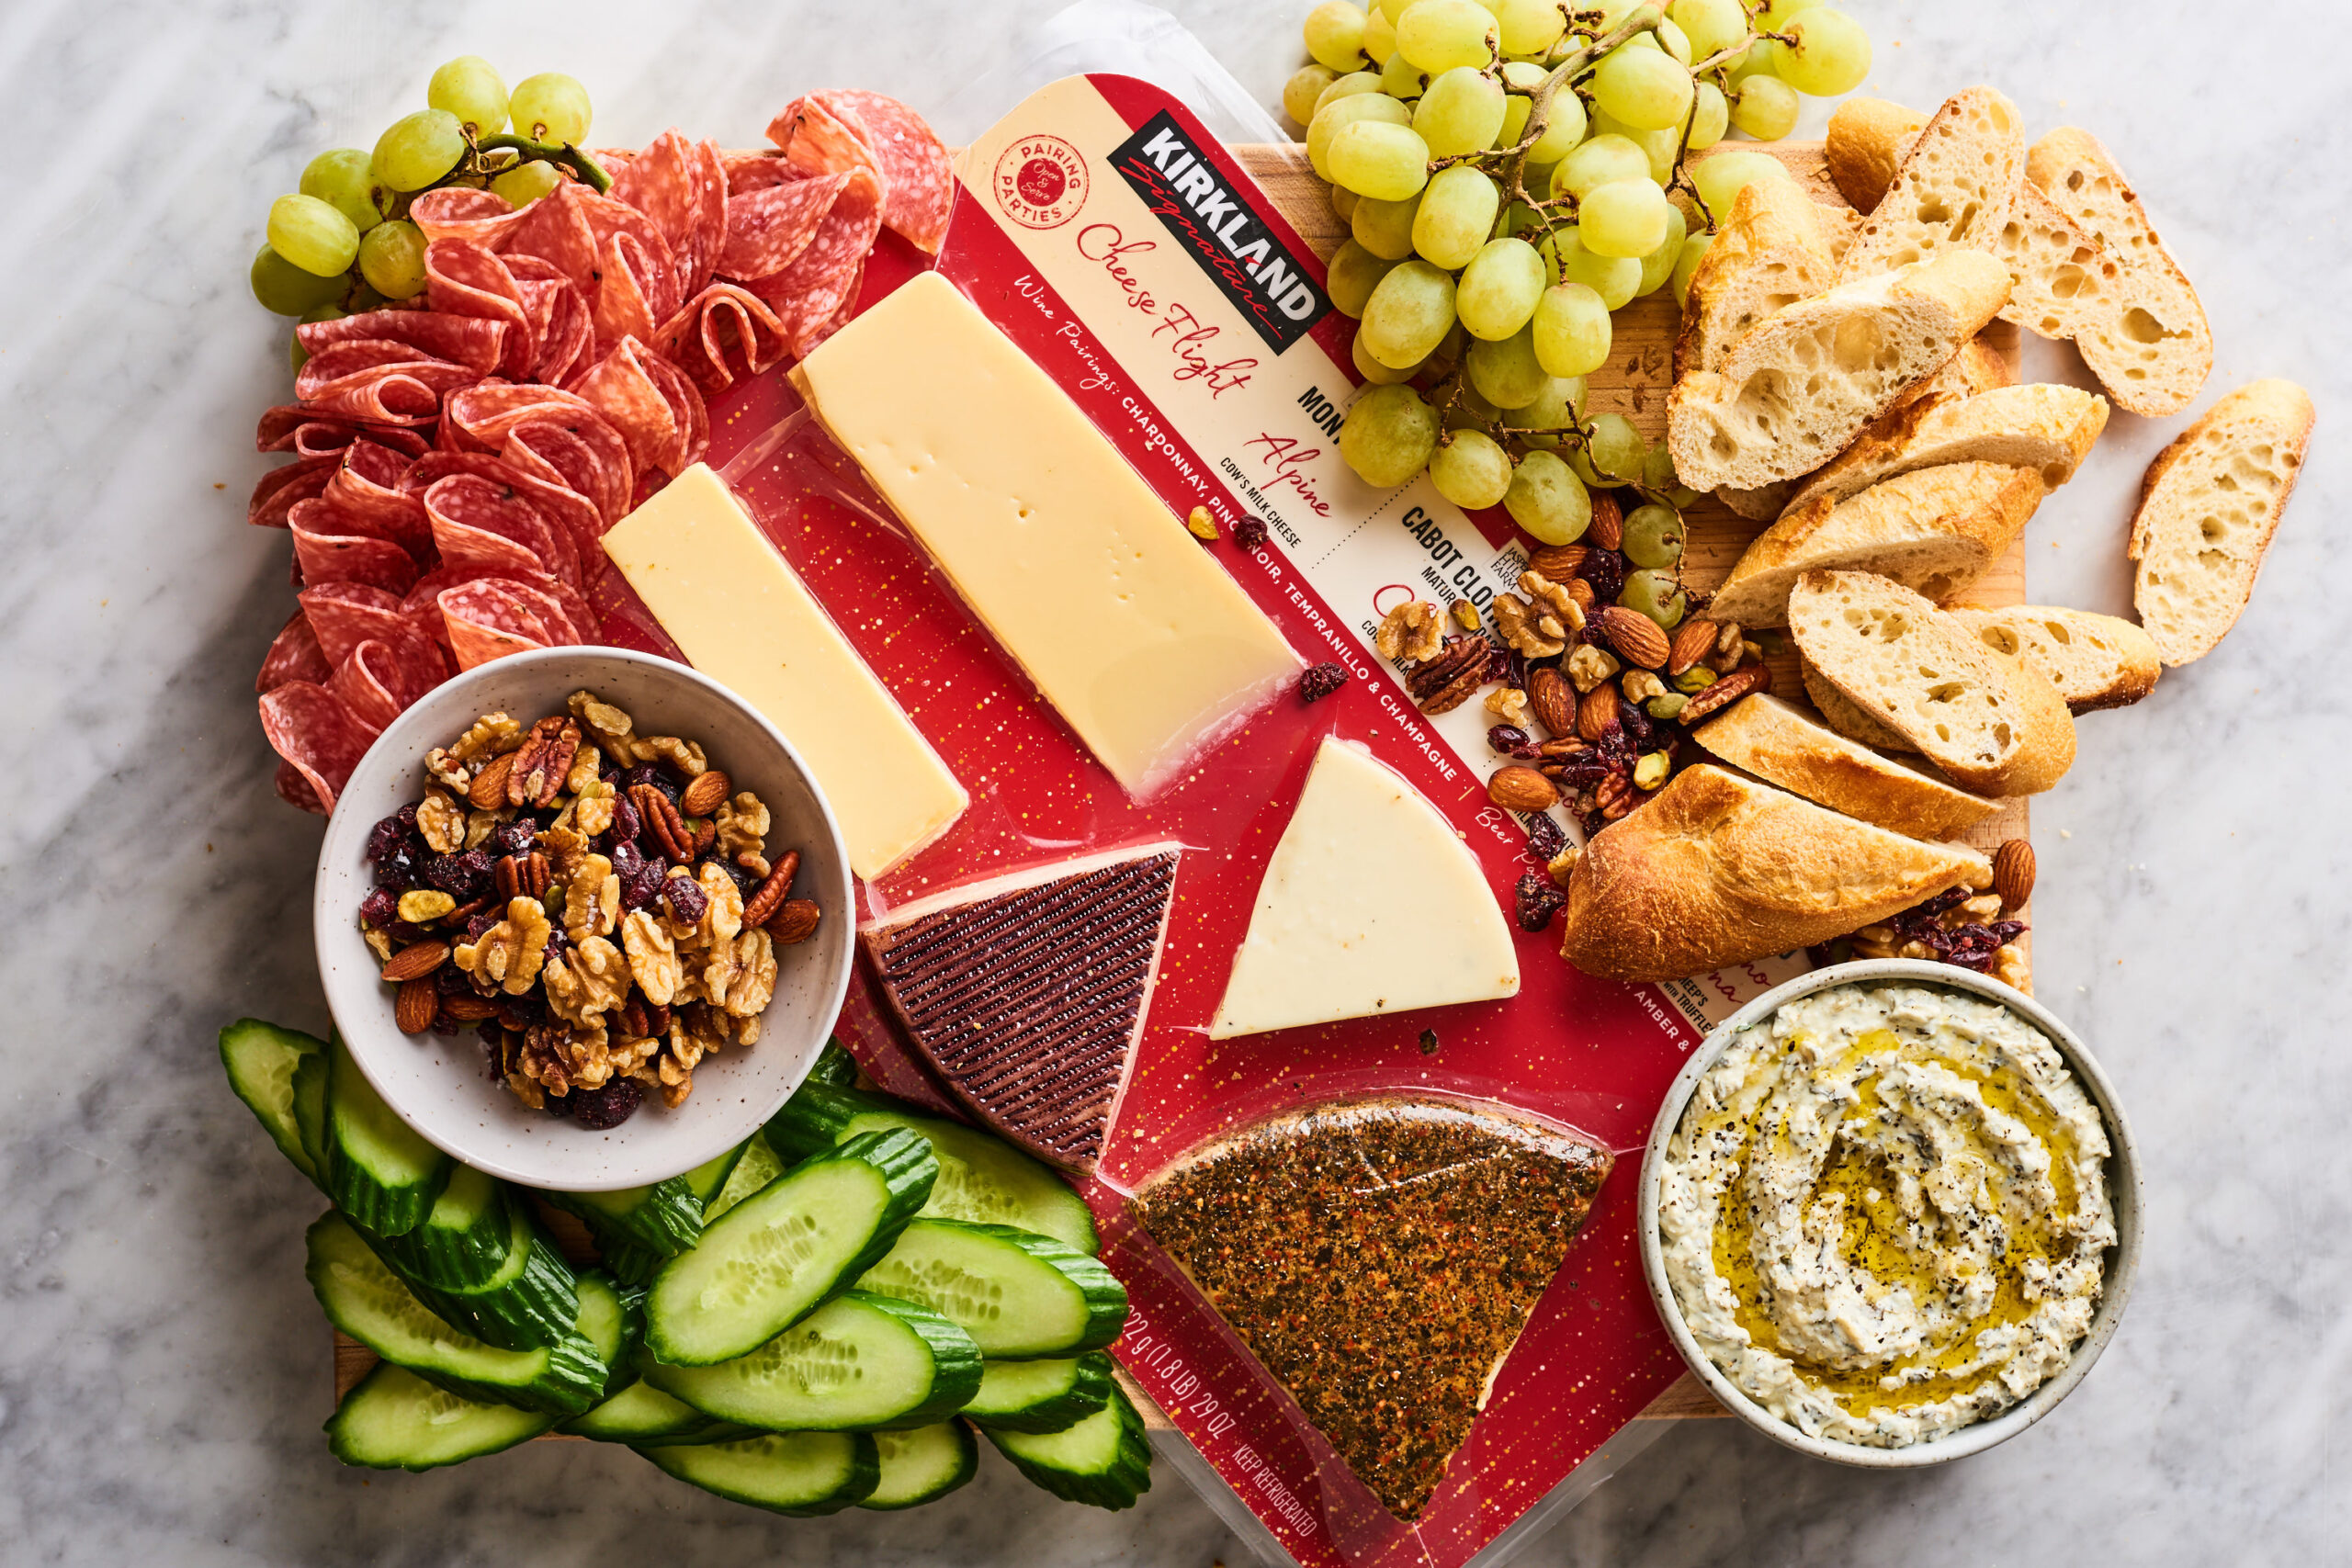 Does Costco have cheese boards?